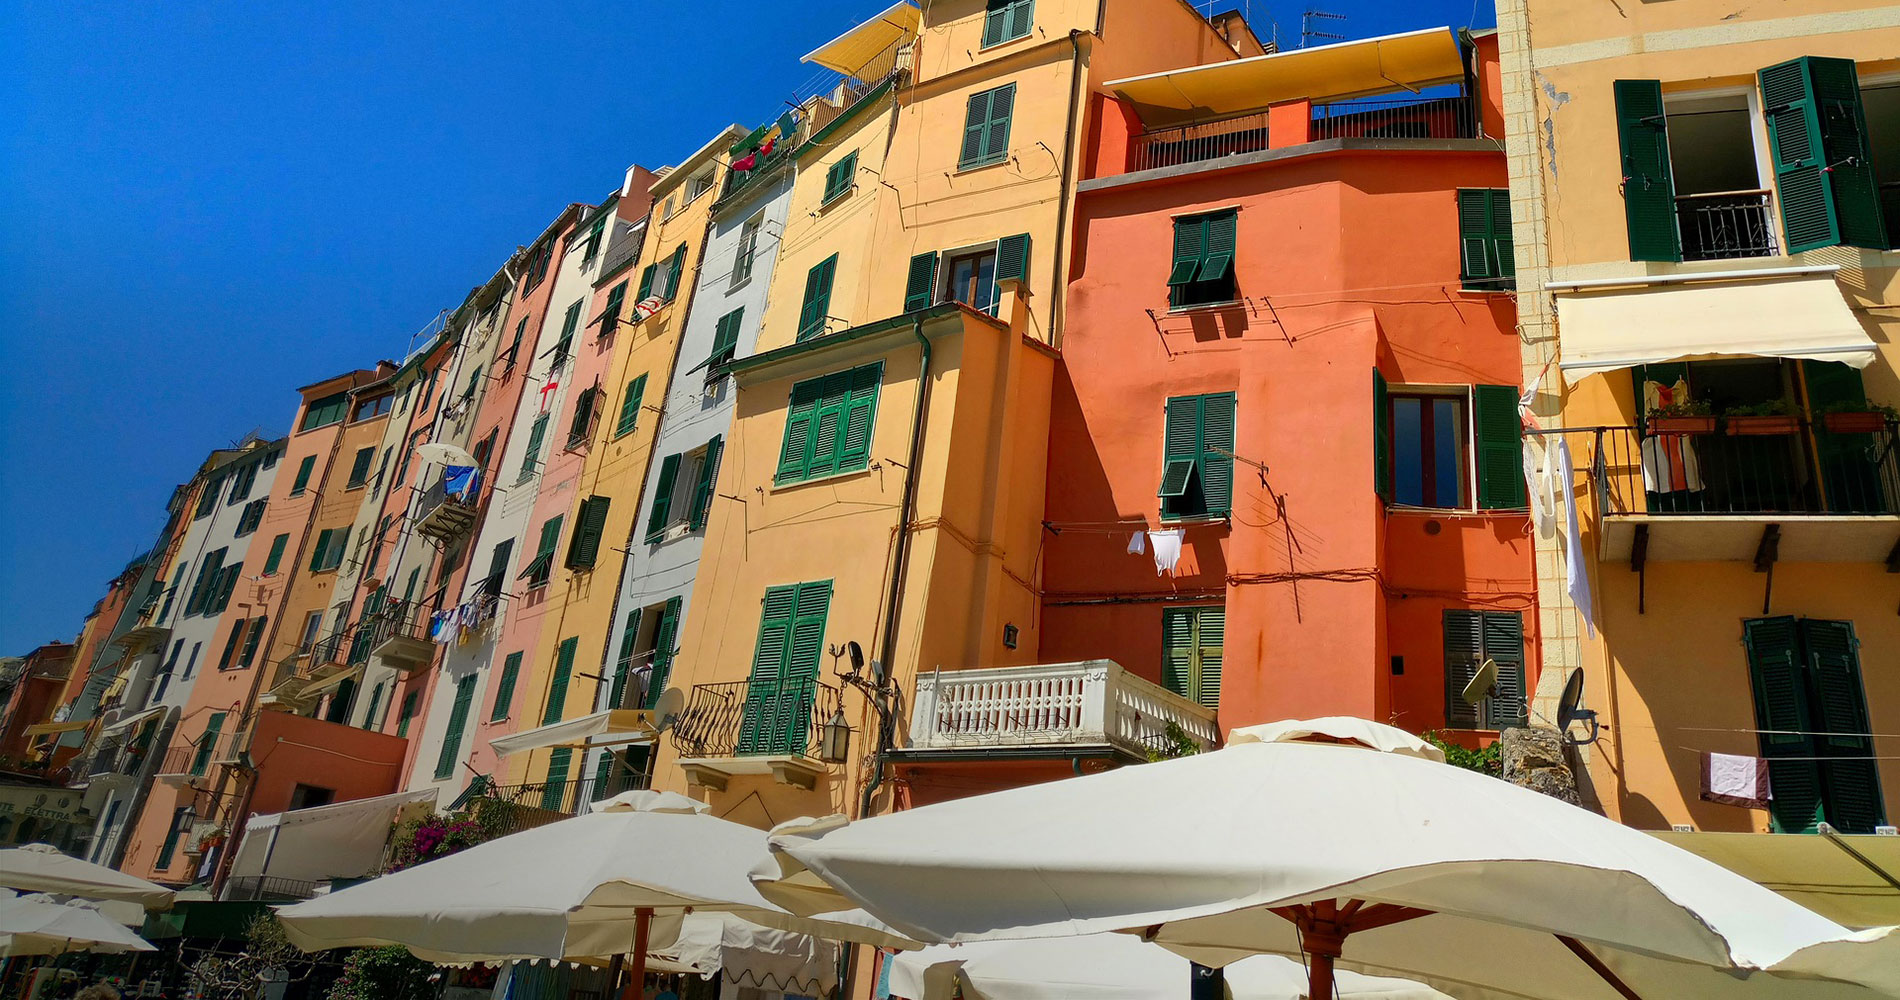 Photos of the colored facades of the houses of Porto Venere